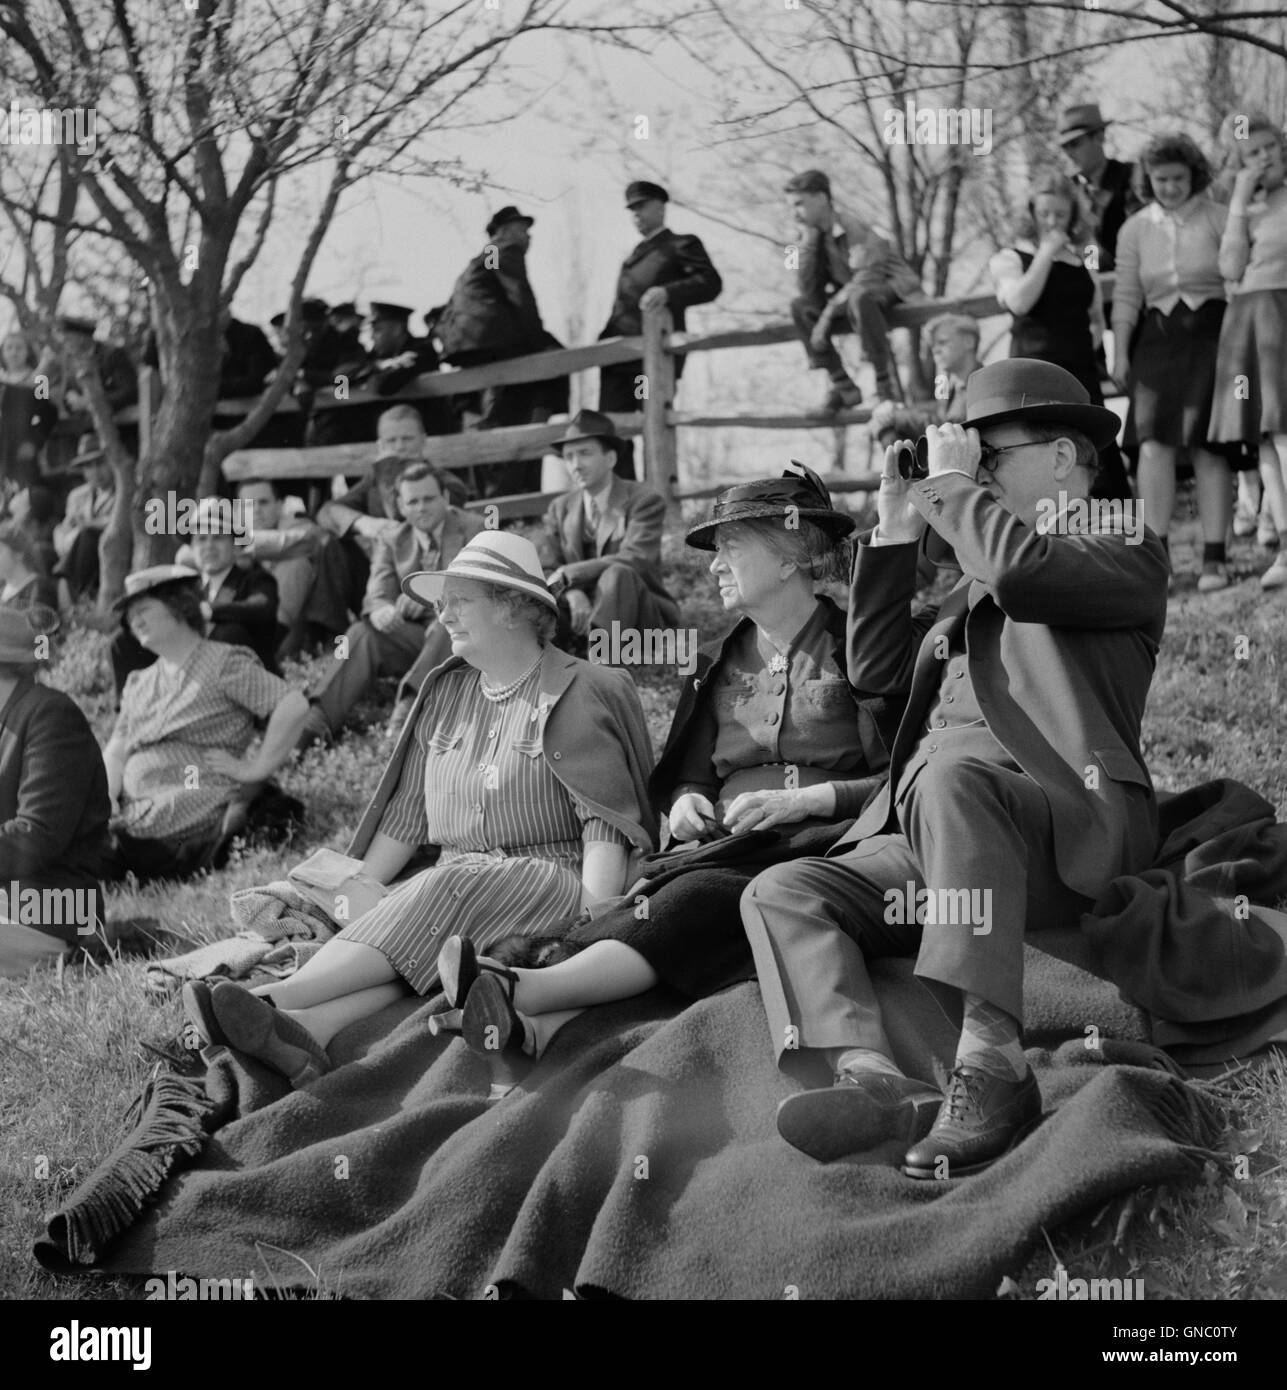 Spectators at Point to Point Cup Race, Maryland Hunt Club, near Glyndon, Maryland, USA, Marion Post Wolcott for Farm Security Administration, May 1941 Stock Photo